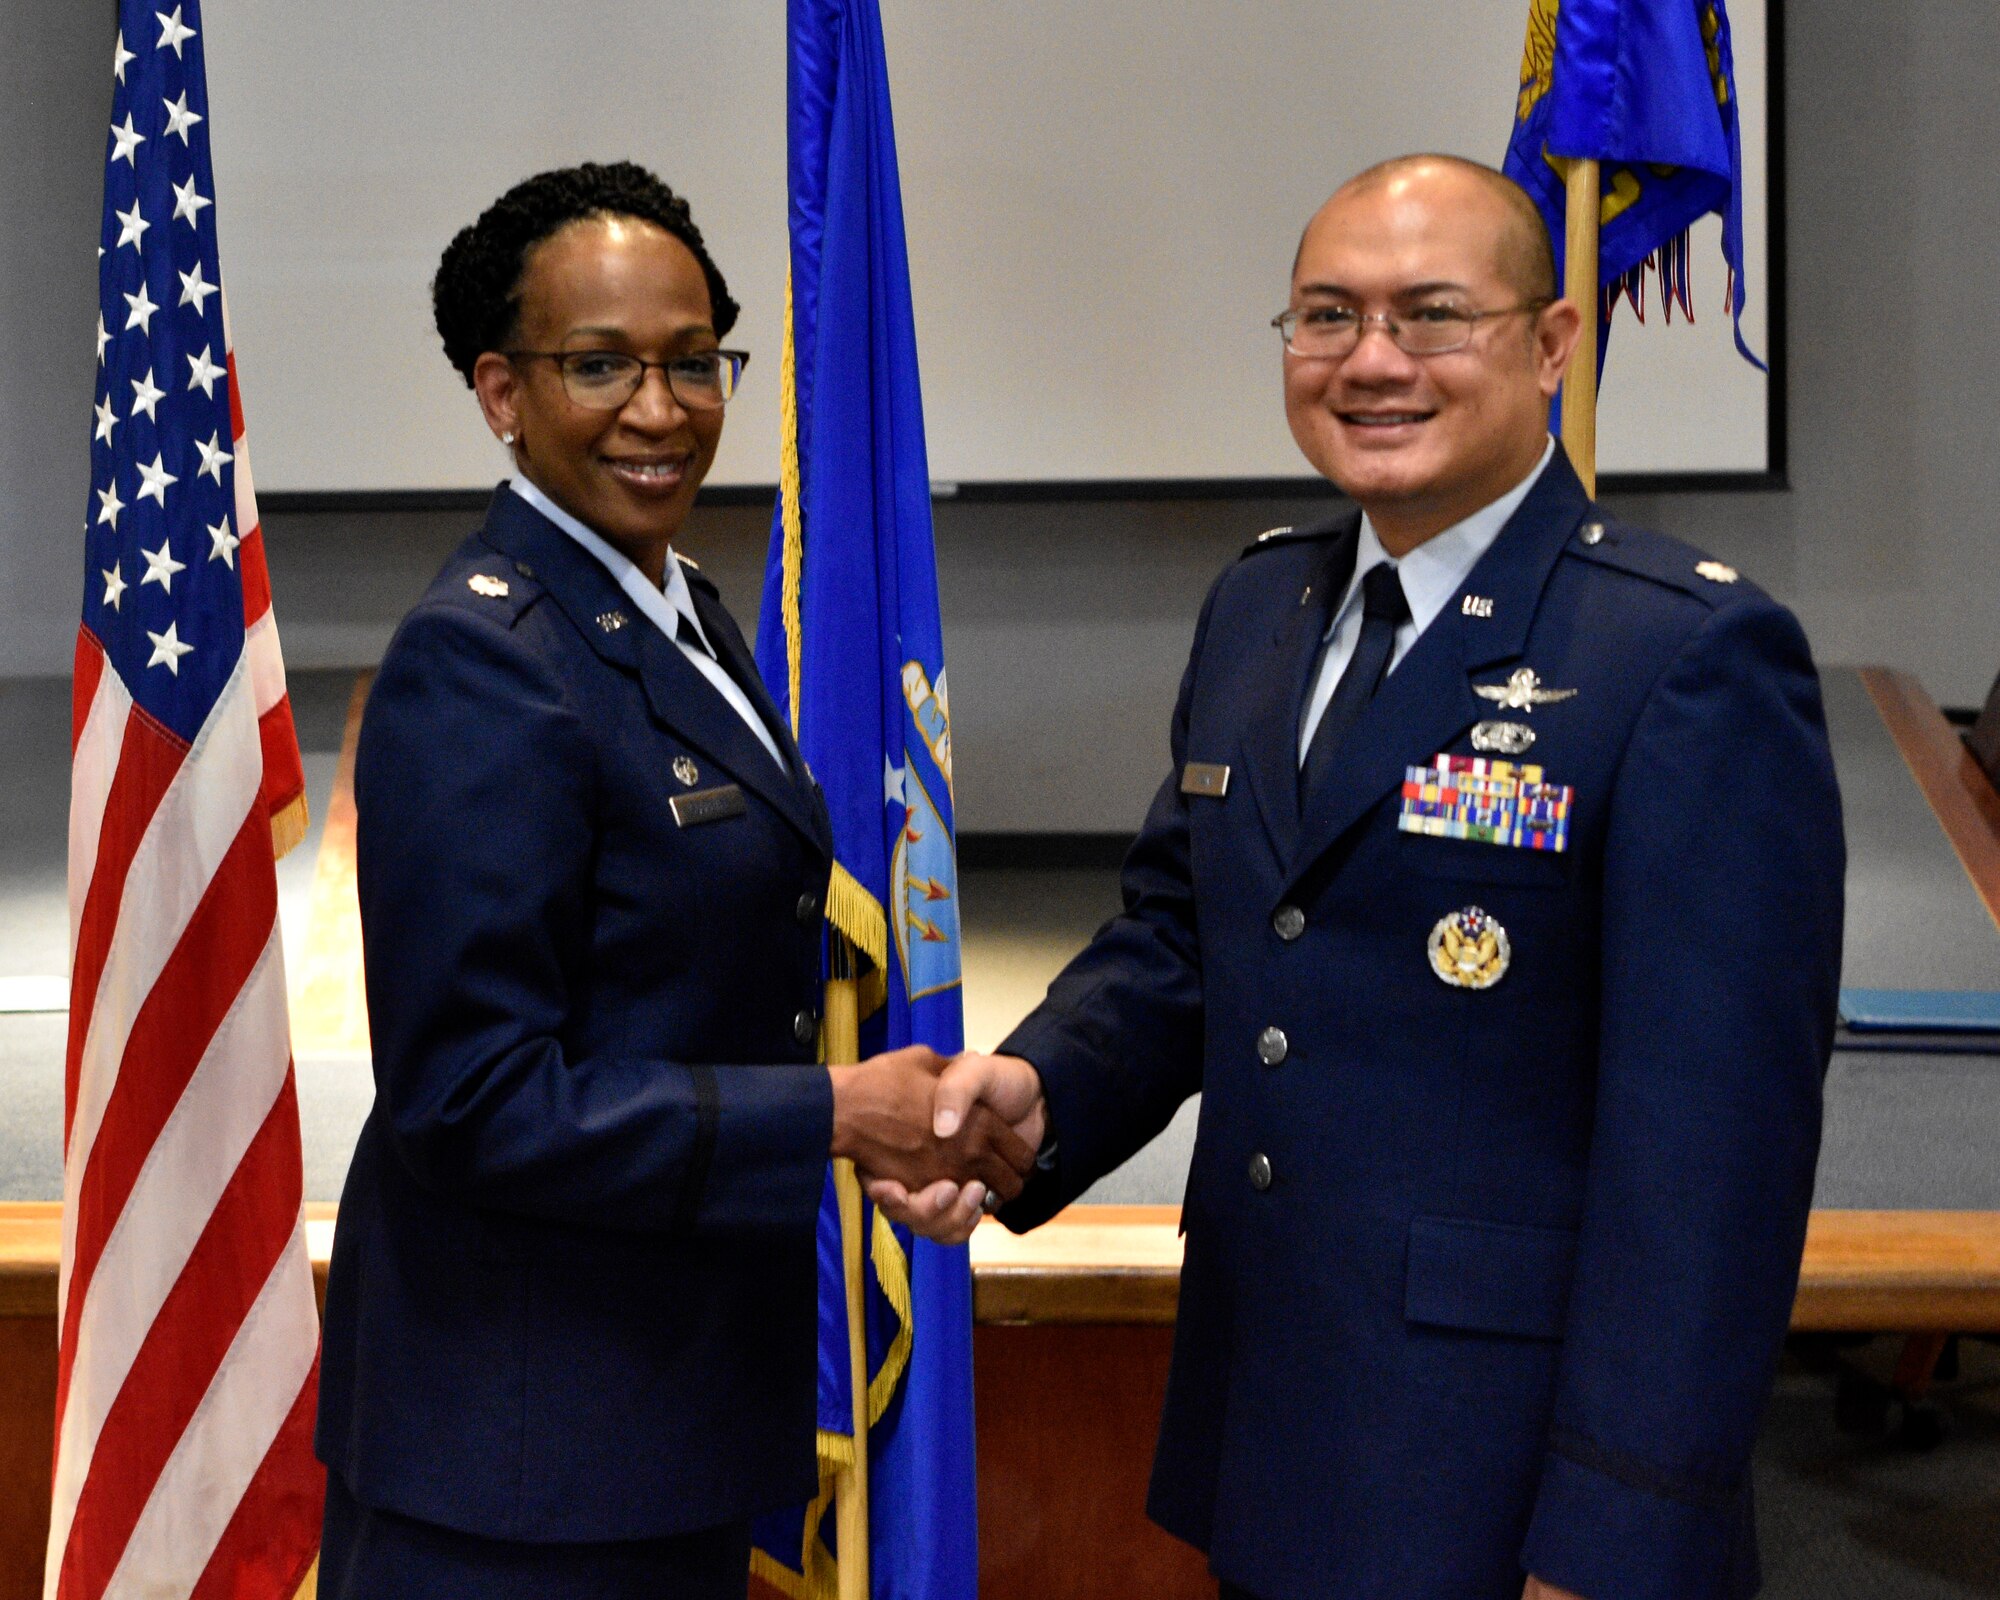 Westover welcomes new 439th Communications Squadron Commander